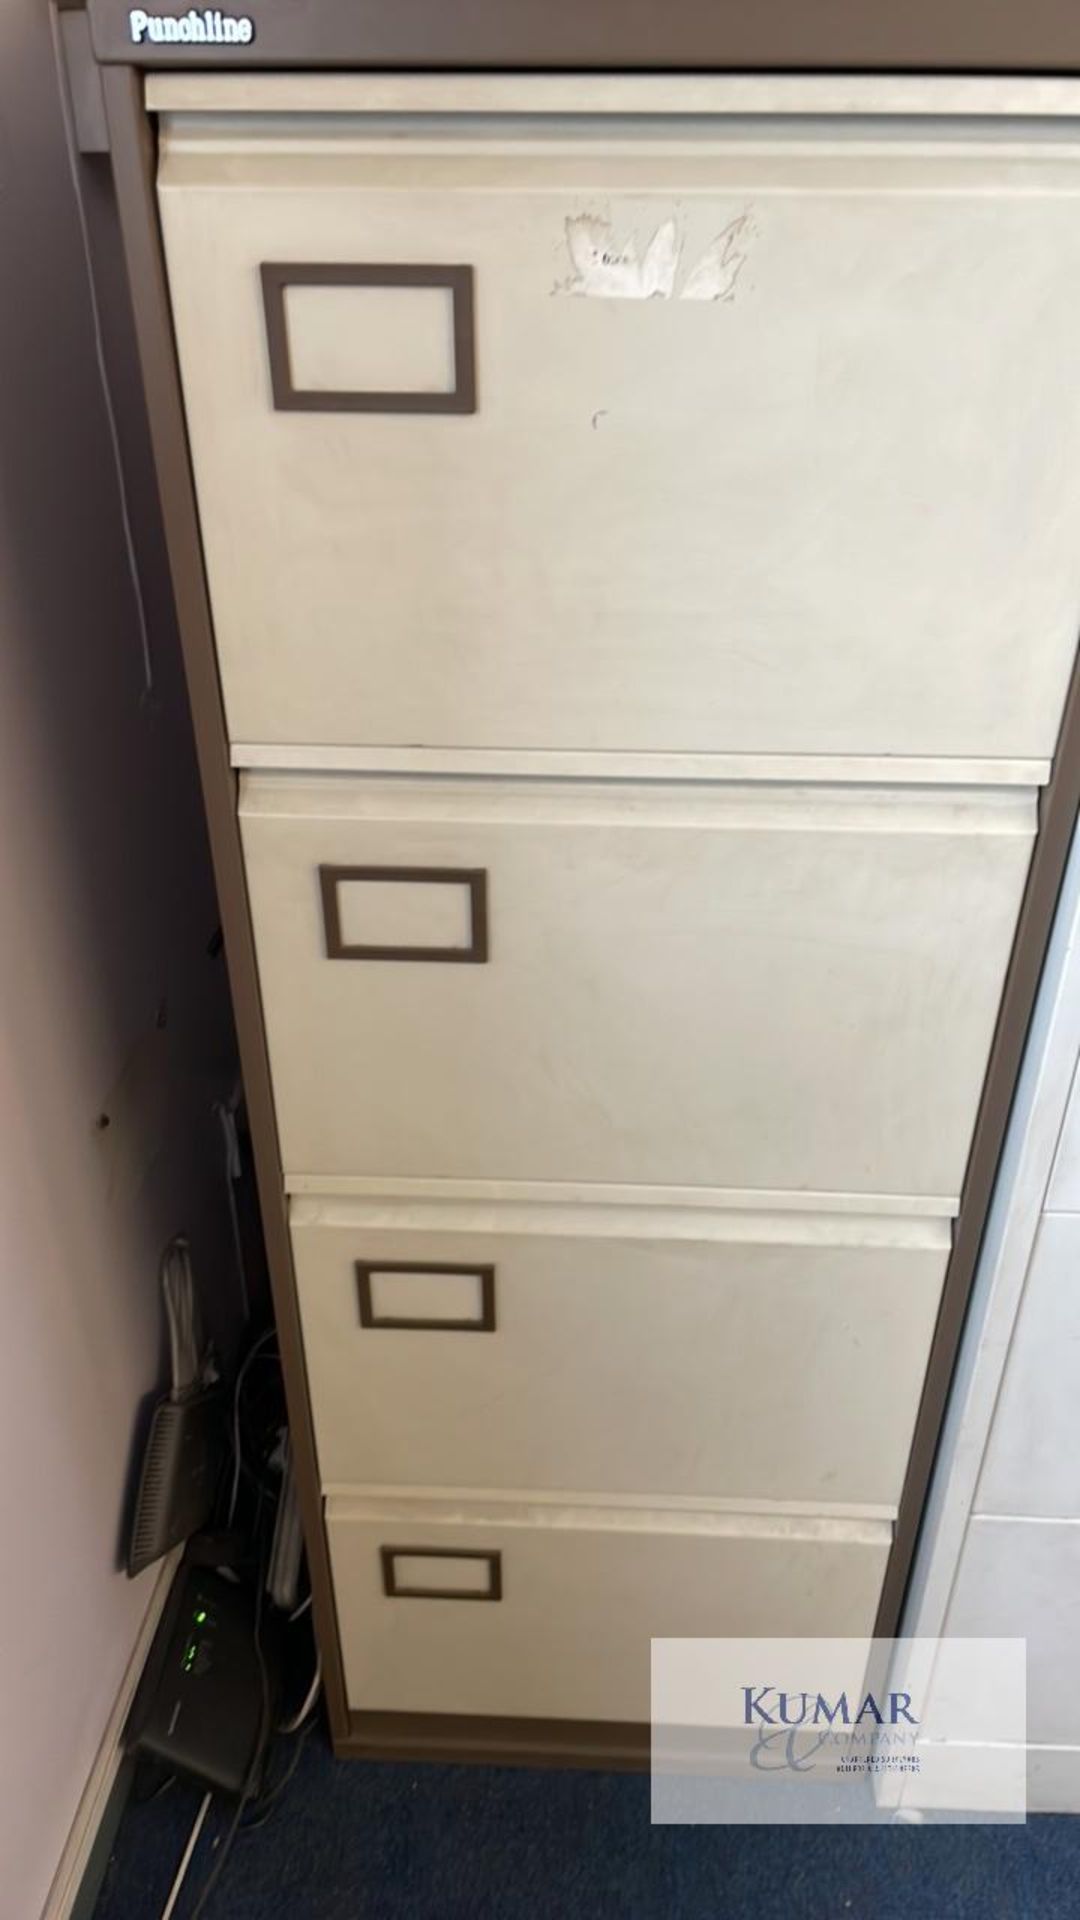 Filling cabinets x 3 Standard sized Does not include items and files Located upstairs office - Image 2 of 5